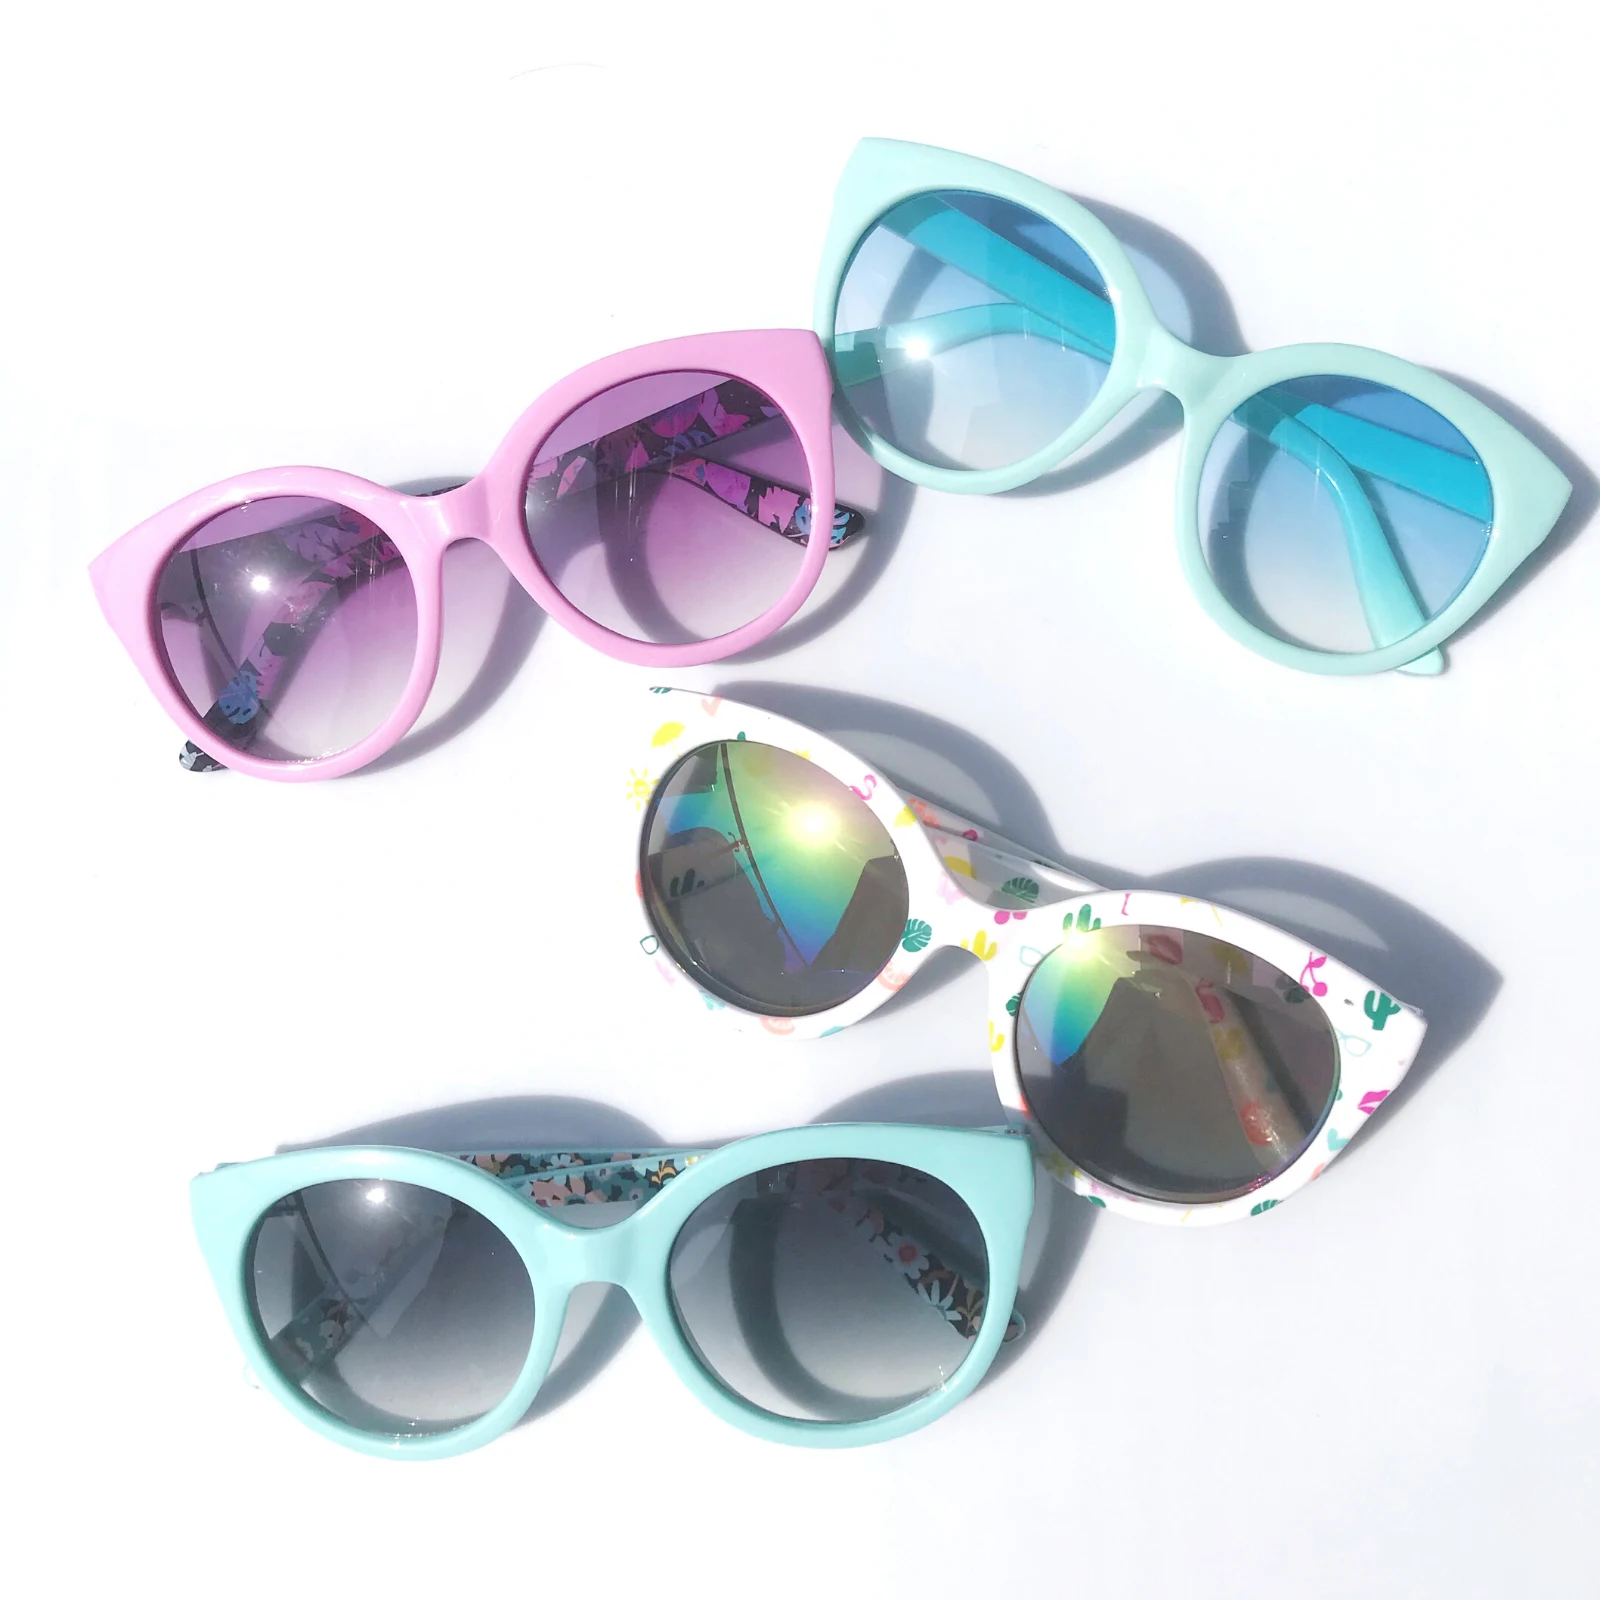 

VIFF HP19753 fancy pattern promotion beach sun glasses river holiday hot seller colorful party wafering sunglasses 2021